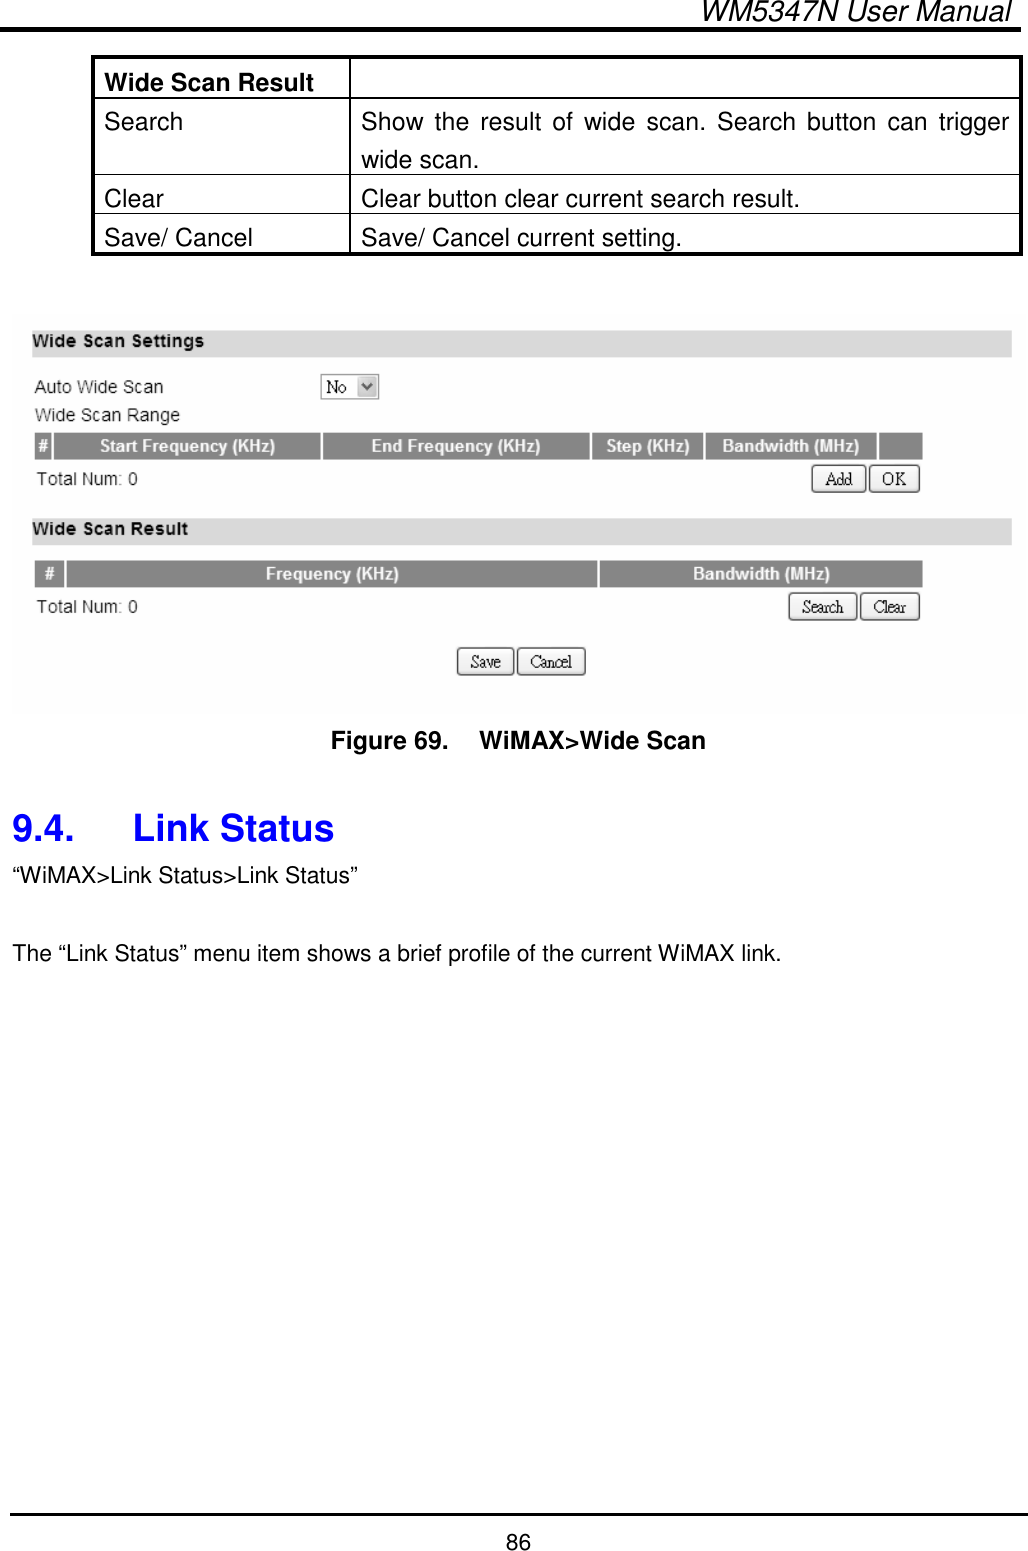  WM5347N User Manual  86 Wide Scan Result   Search  Show  the  result of  wide  scan. Search  button  can  trigger wide scan. Clear  Clear button clear current search result. Save/ Cancel  Save/ Cancel current setting.   Figure 69.   WiMAX&gt;Wide Scan  9.4.  Link Status “WiMAX&gt;Link Status&gt;Link Status”  The “Link Status” menu item shows a brief profile of the current WiMAX link.   